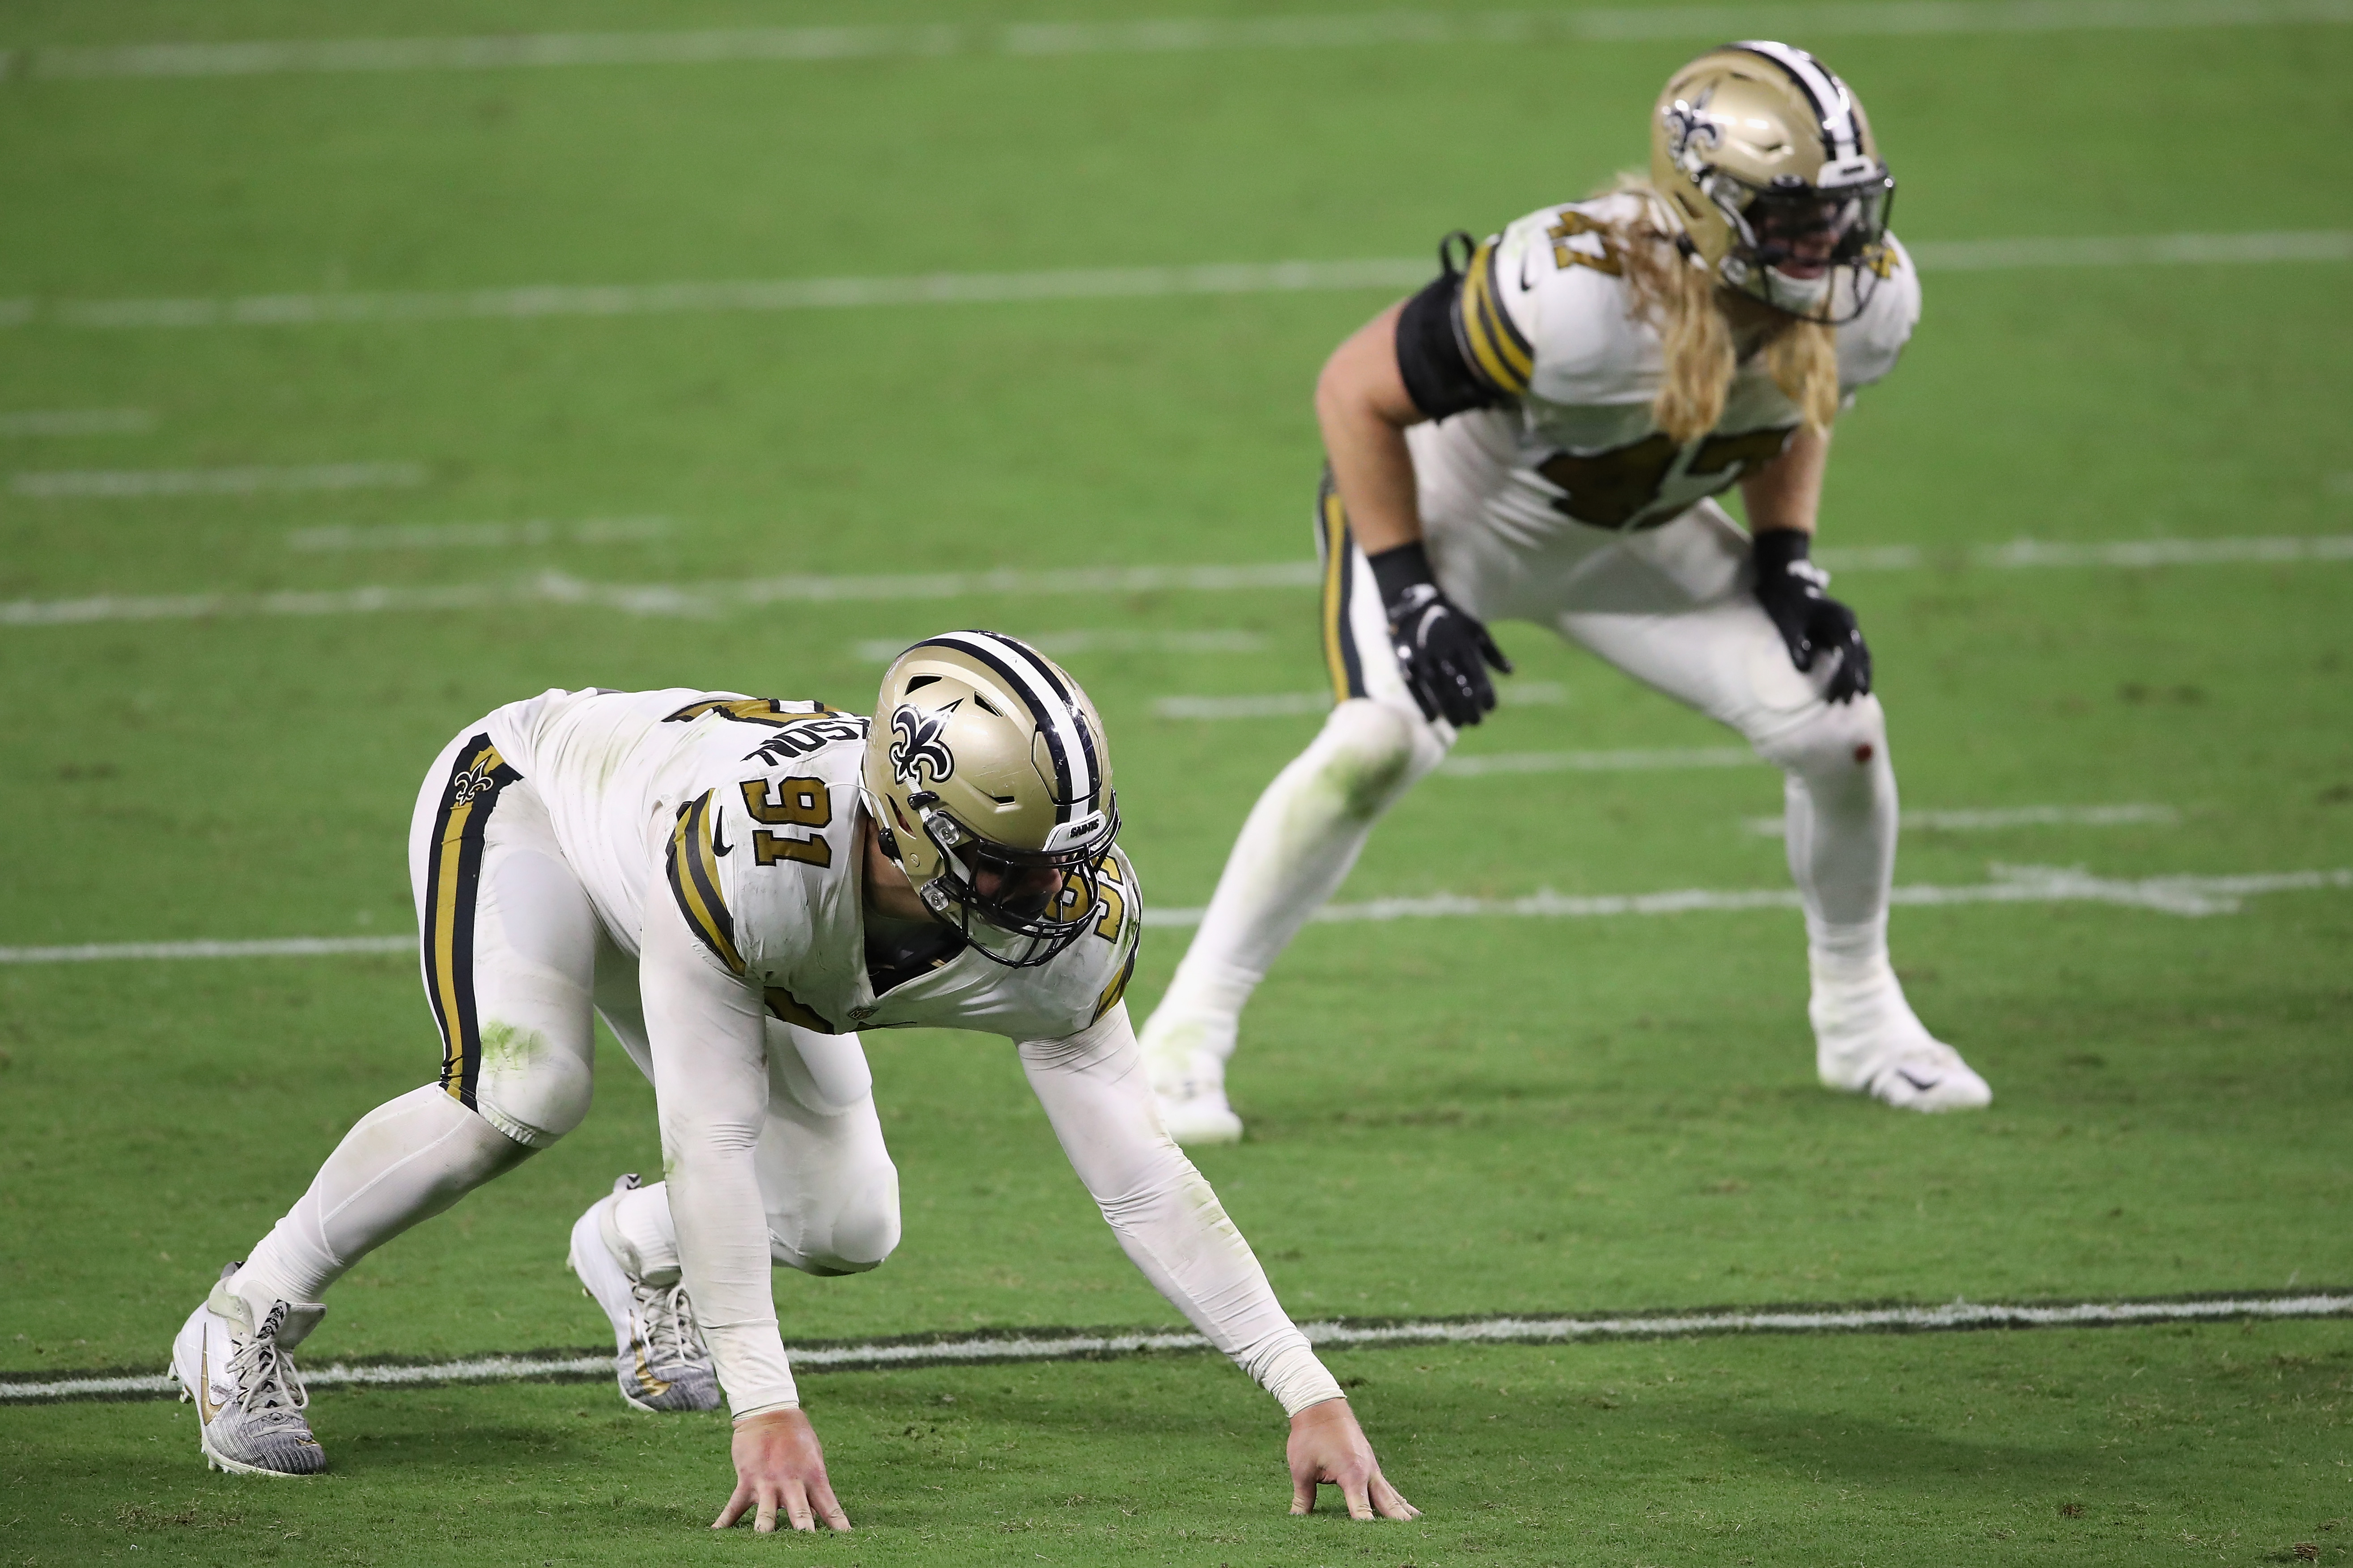 Defensive end Trey Hendrickson is having a breakout 2020 season for the New Orleans Saints. Hendrickson is playing his way into a major contract extension.